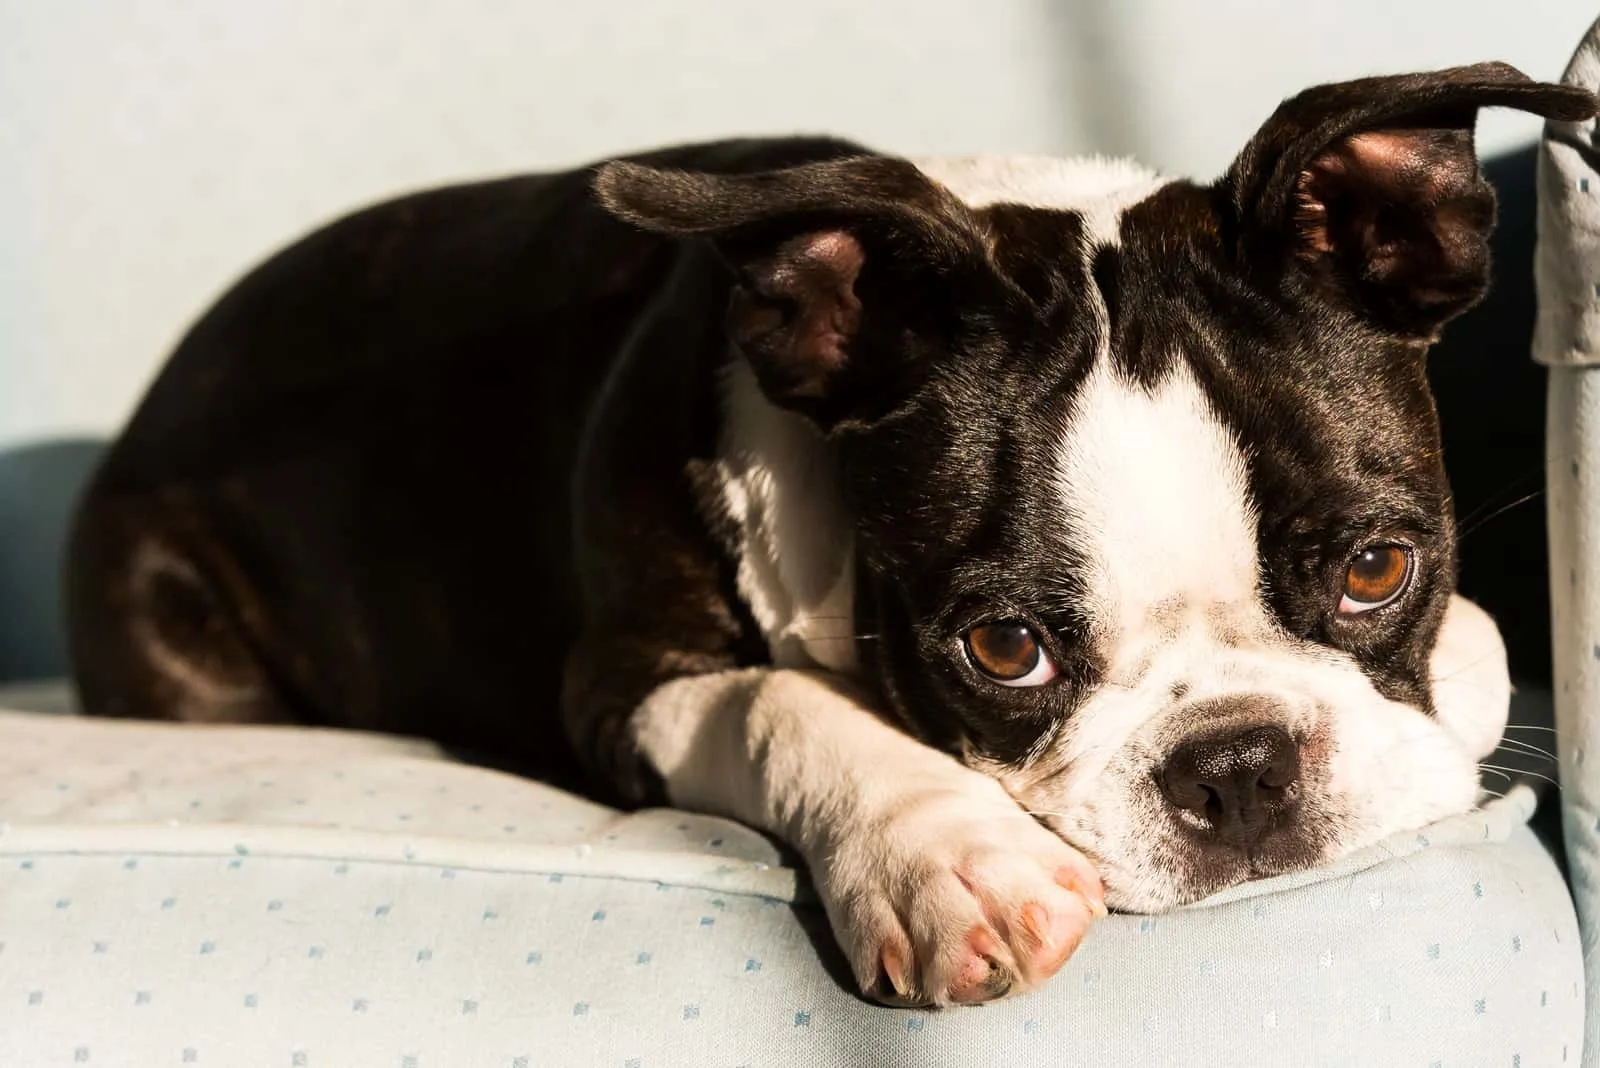 The Boston Terrier puppy lies down and rests